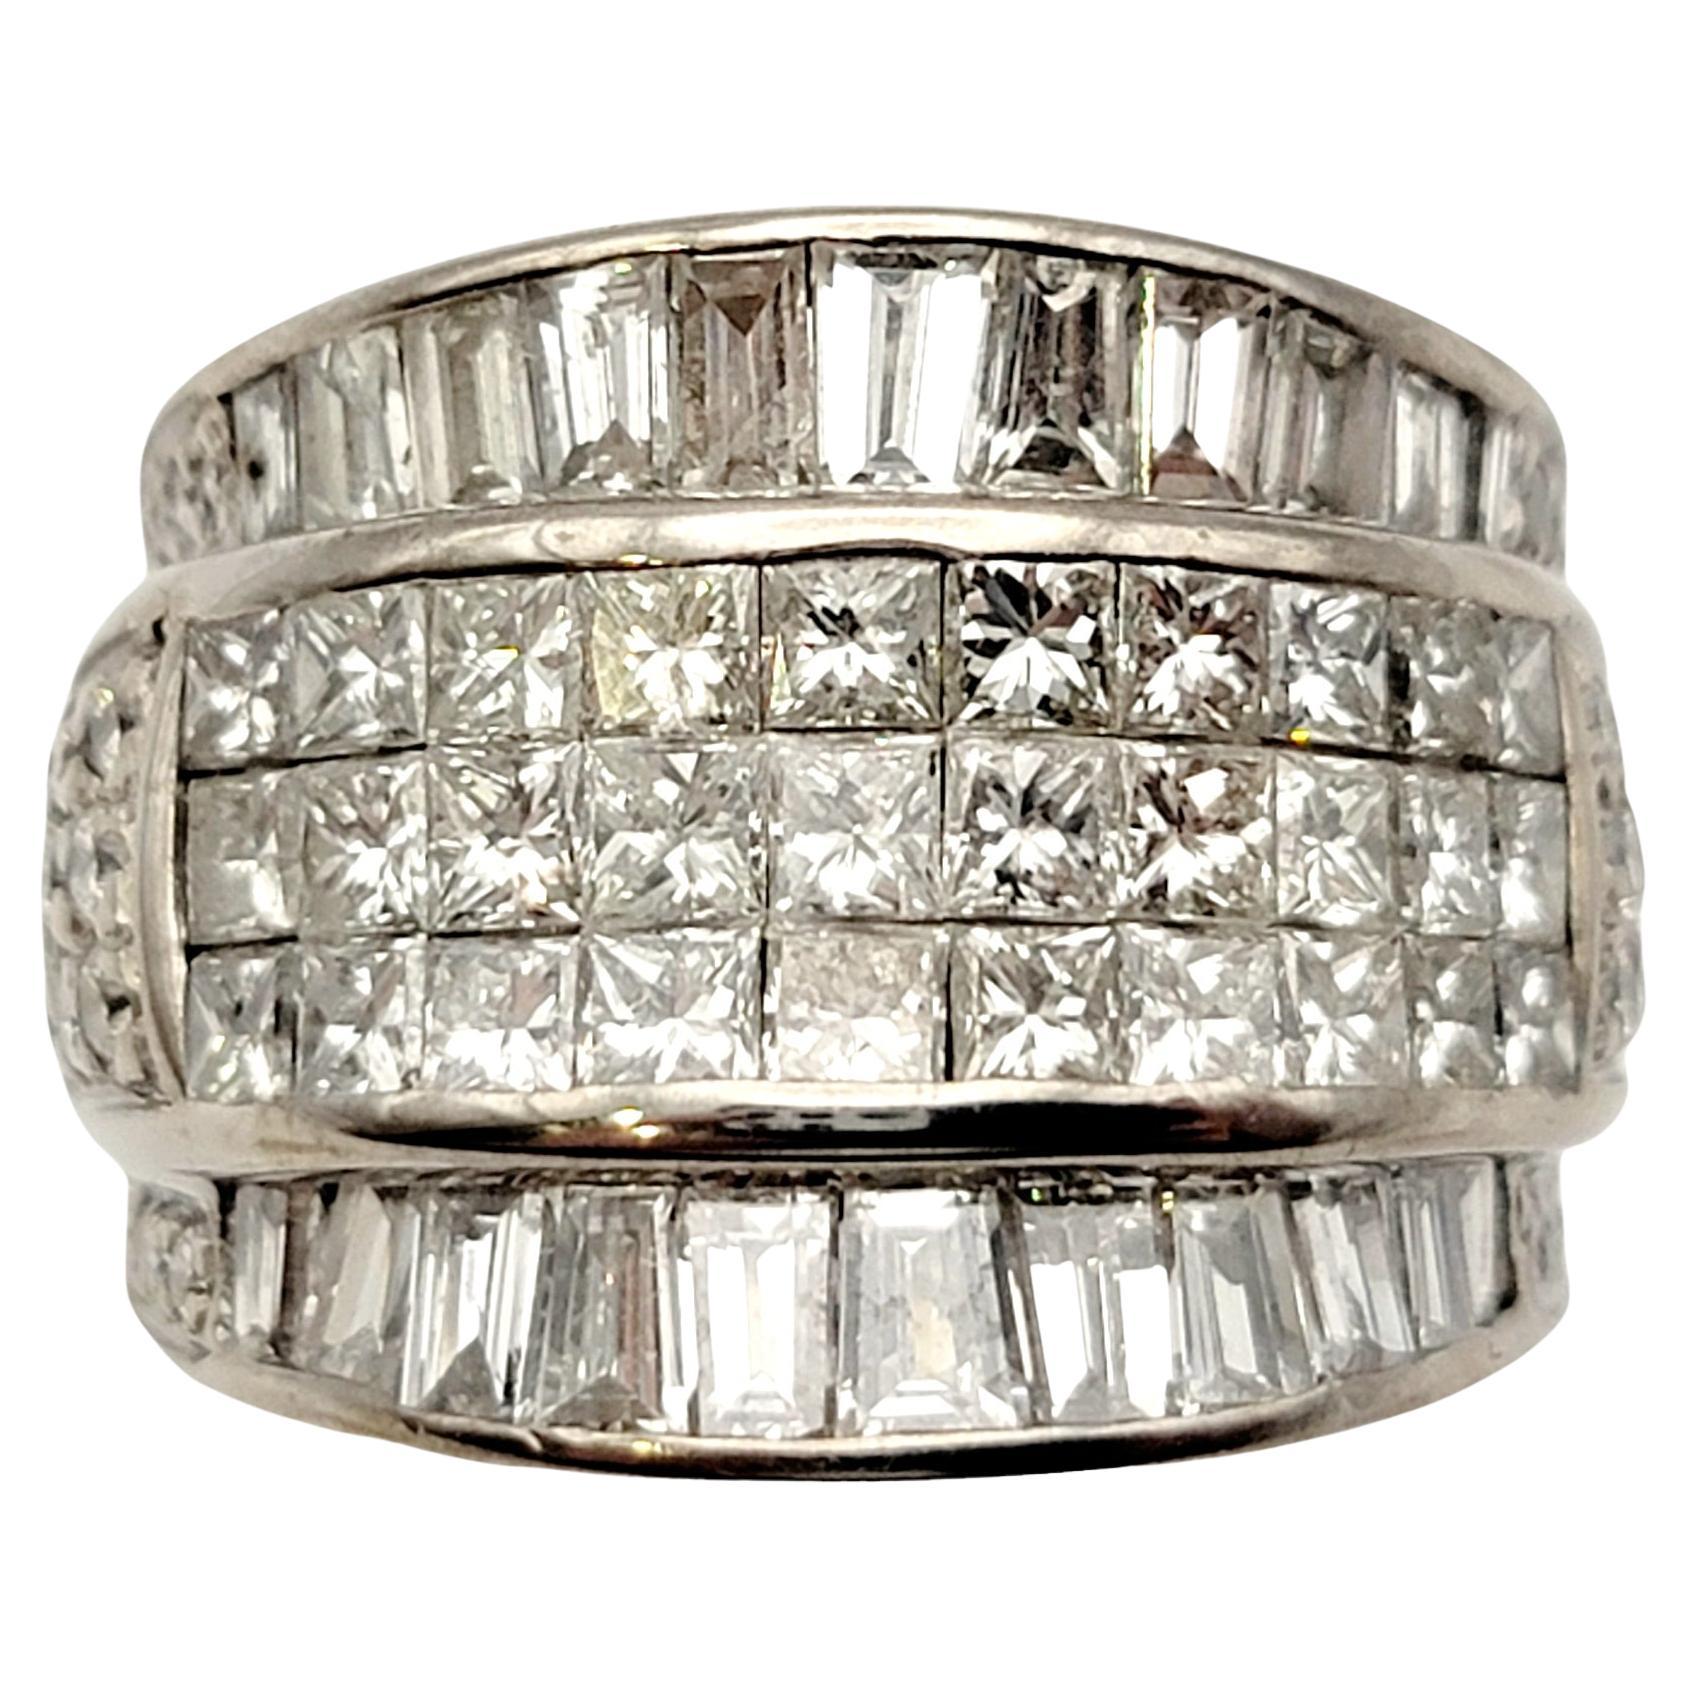 Ring size: 7

This stunning diamond band ring wraps elegantly around the finger and fills it with sparkle from end to end. Featuring a contemporary wide band design, this ring is smooth, sleek, and sophisticated. The closely set natural stones catch